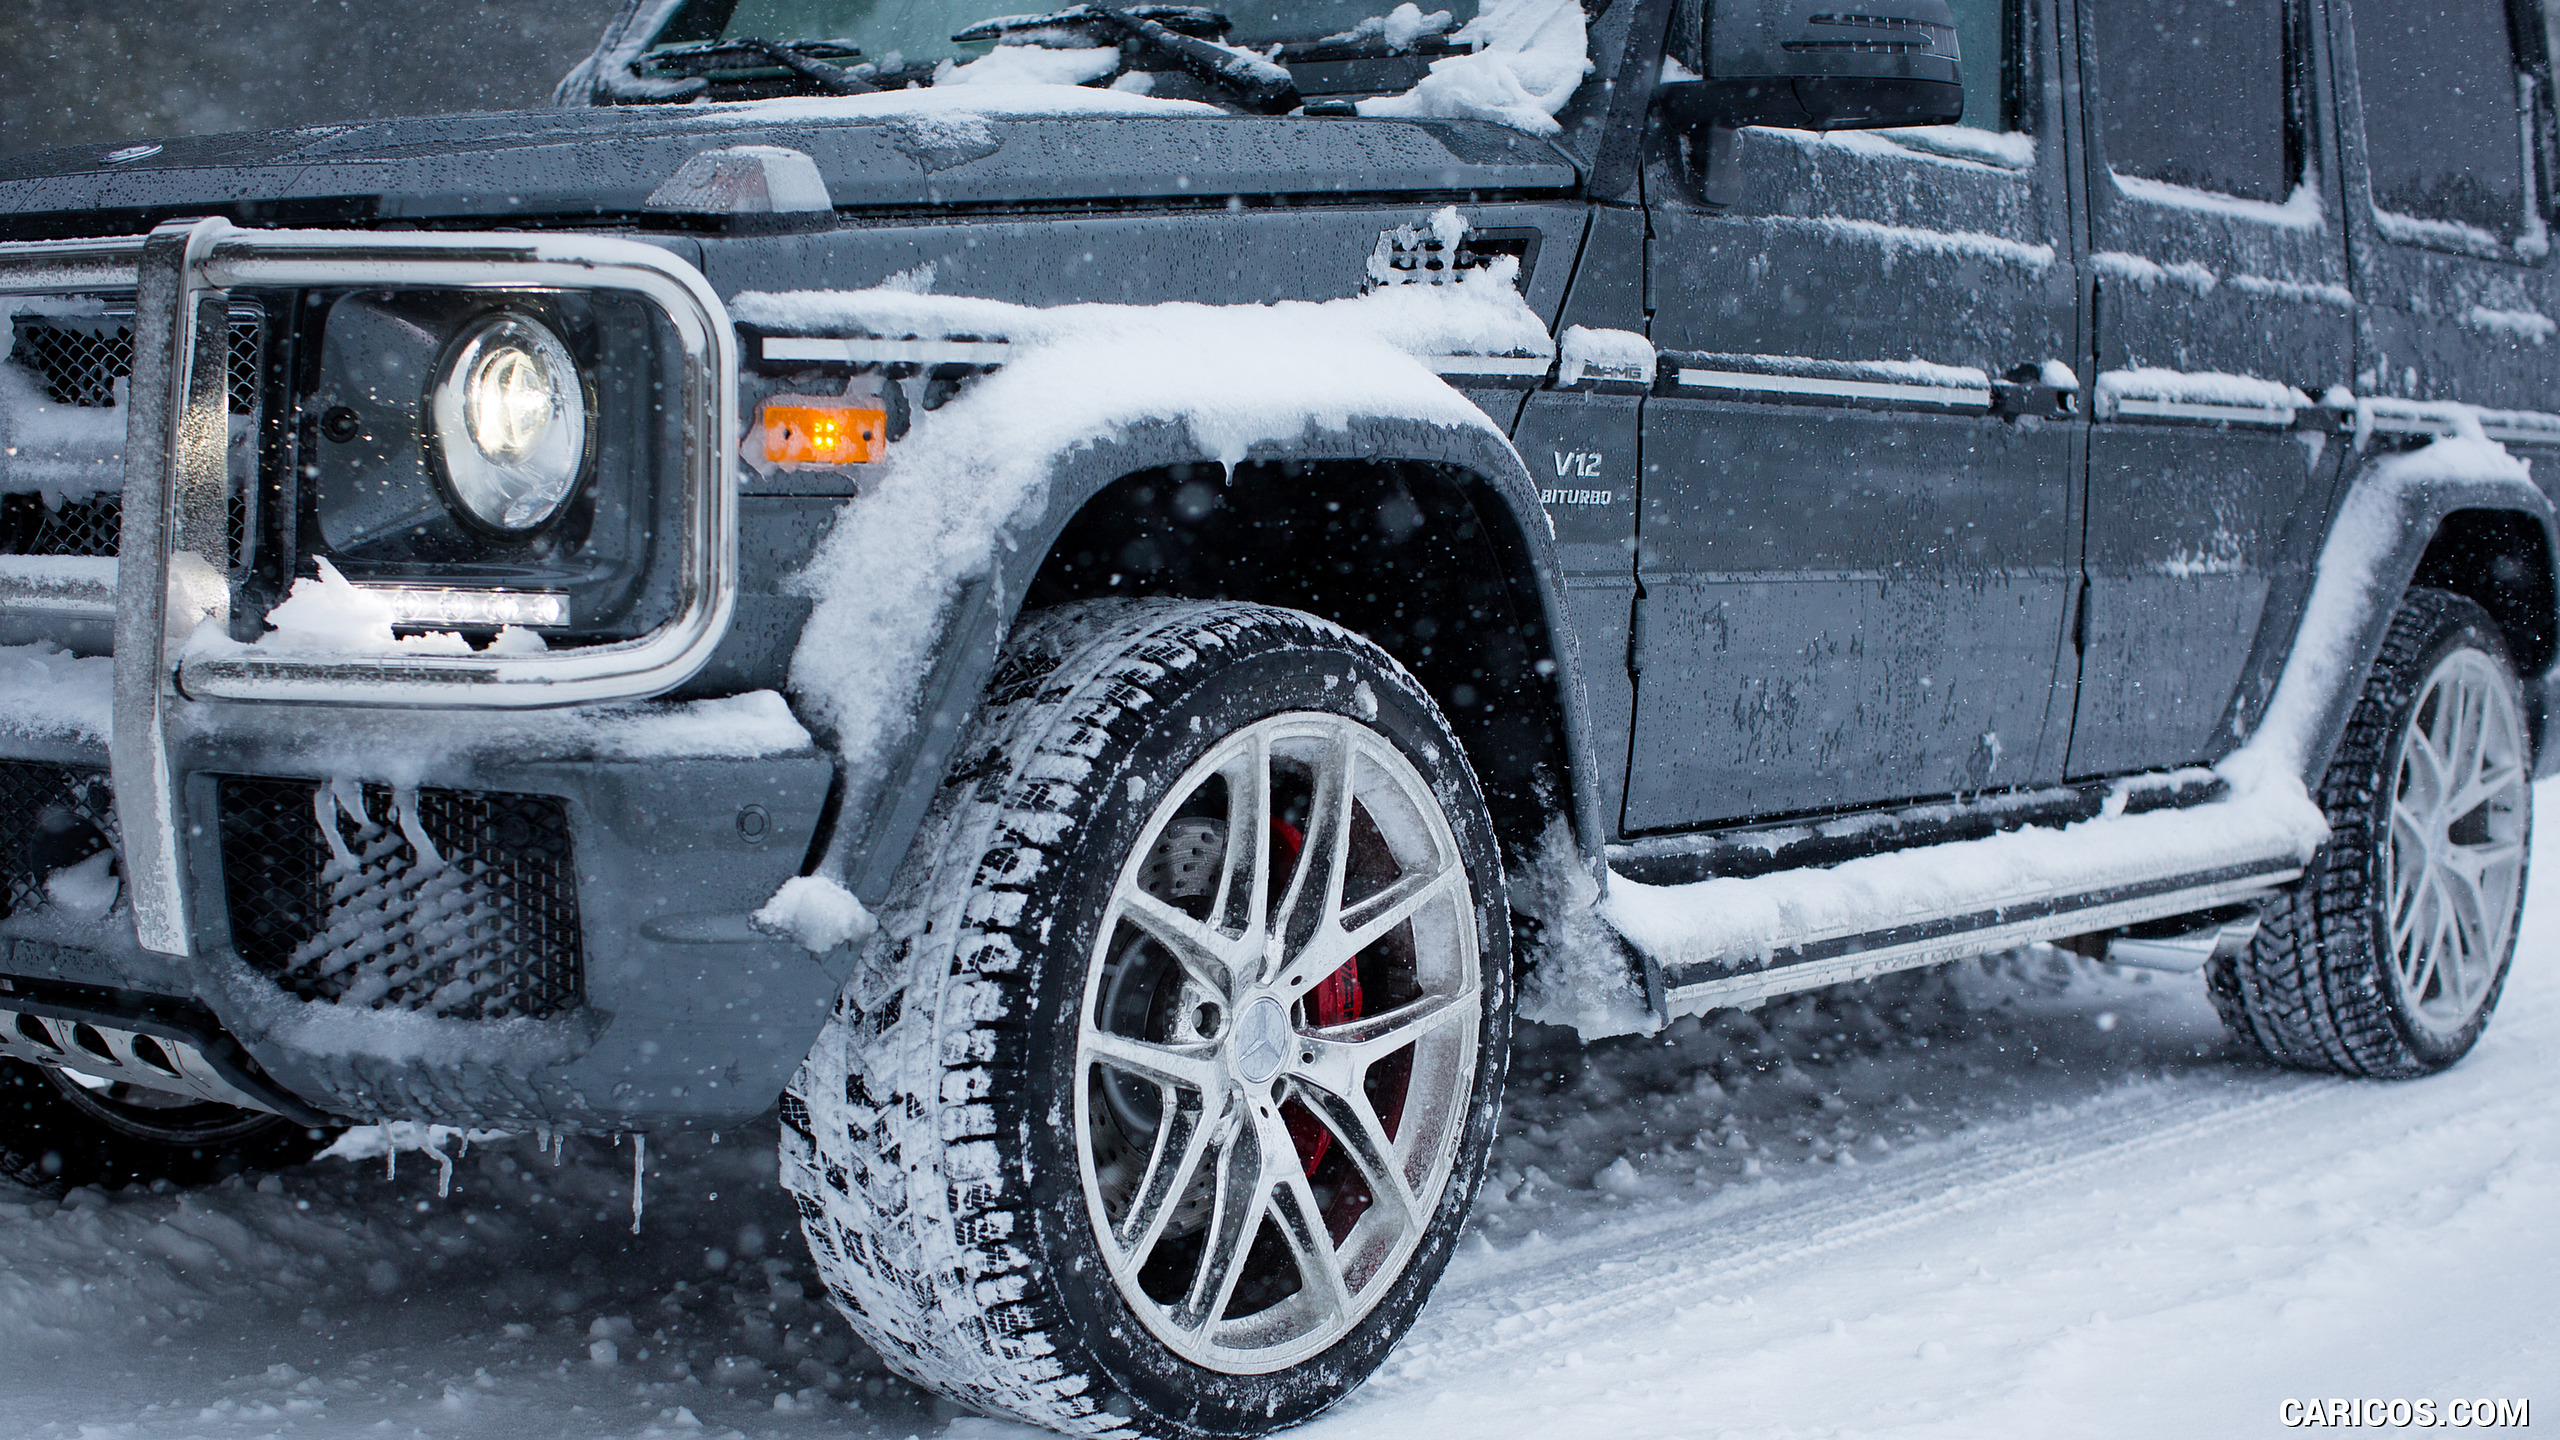 2017 Mercedes-AMG G65 AMG (US-Spec) in snow - Detail, #36 of 45